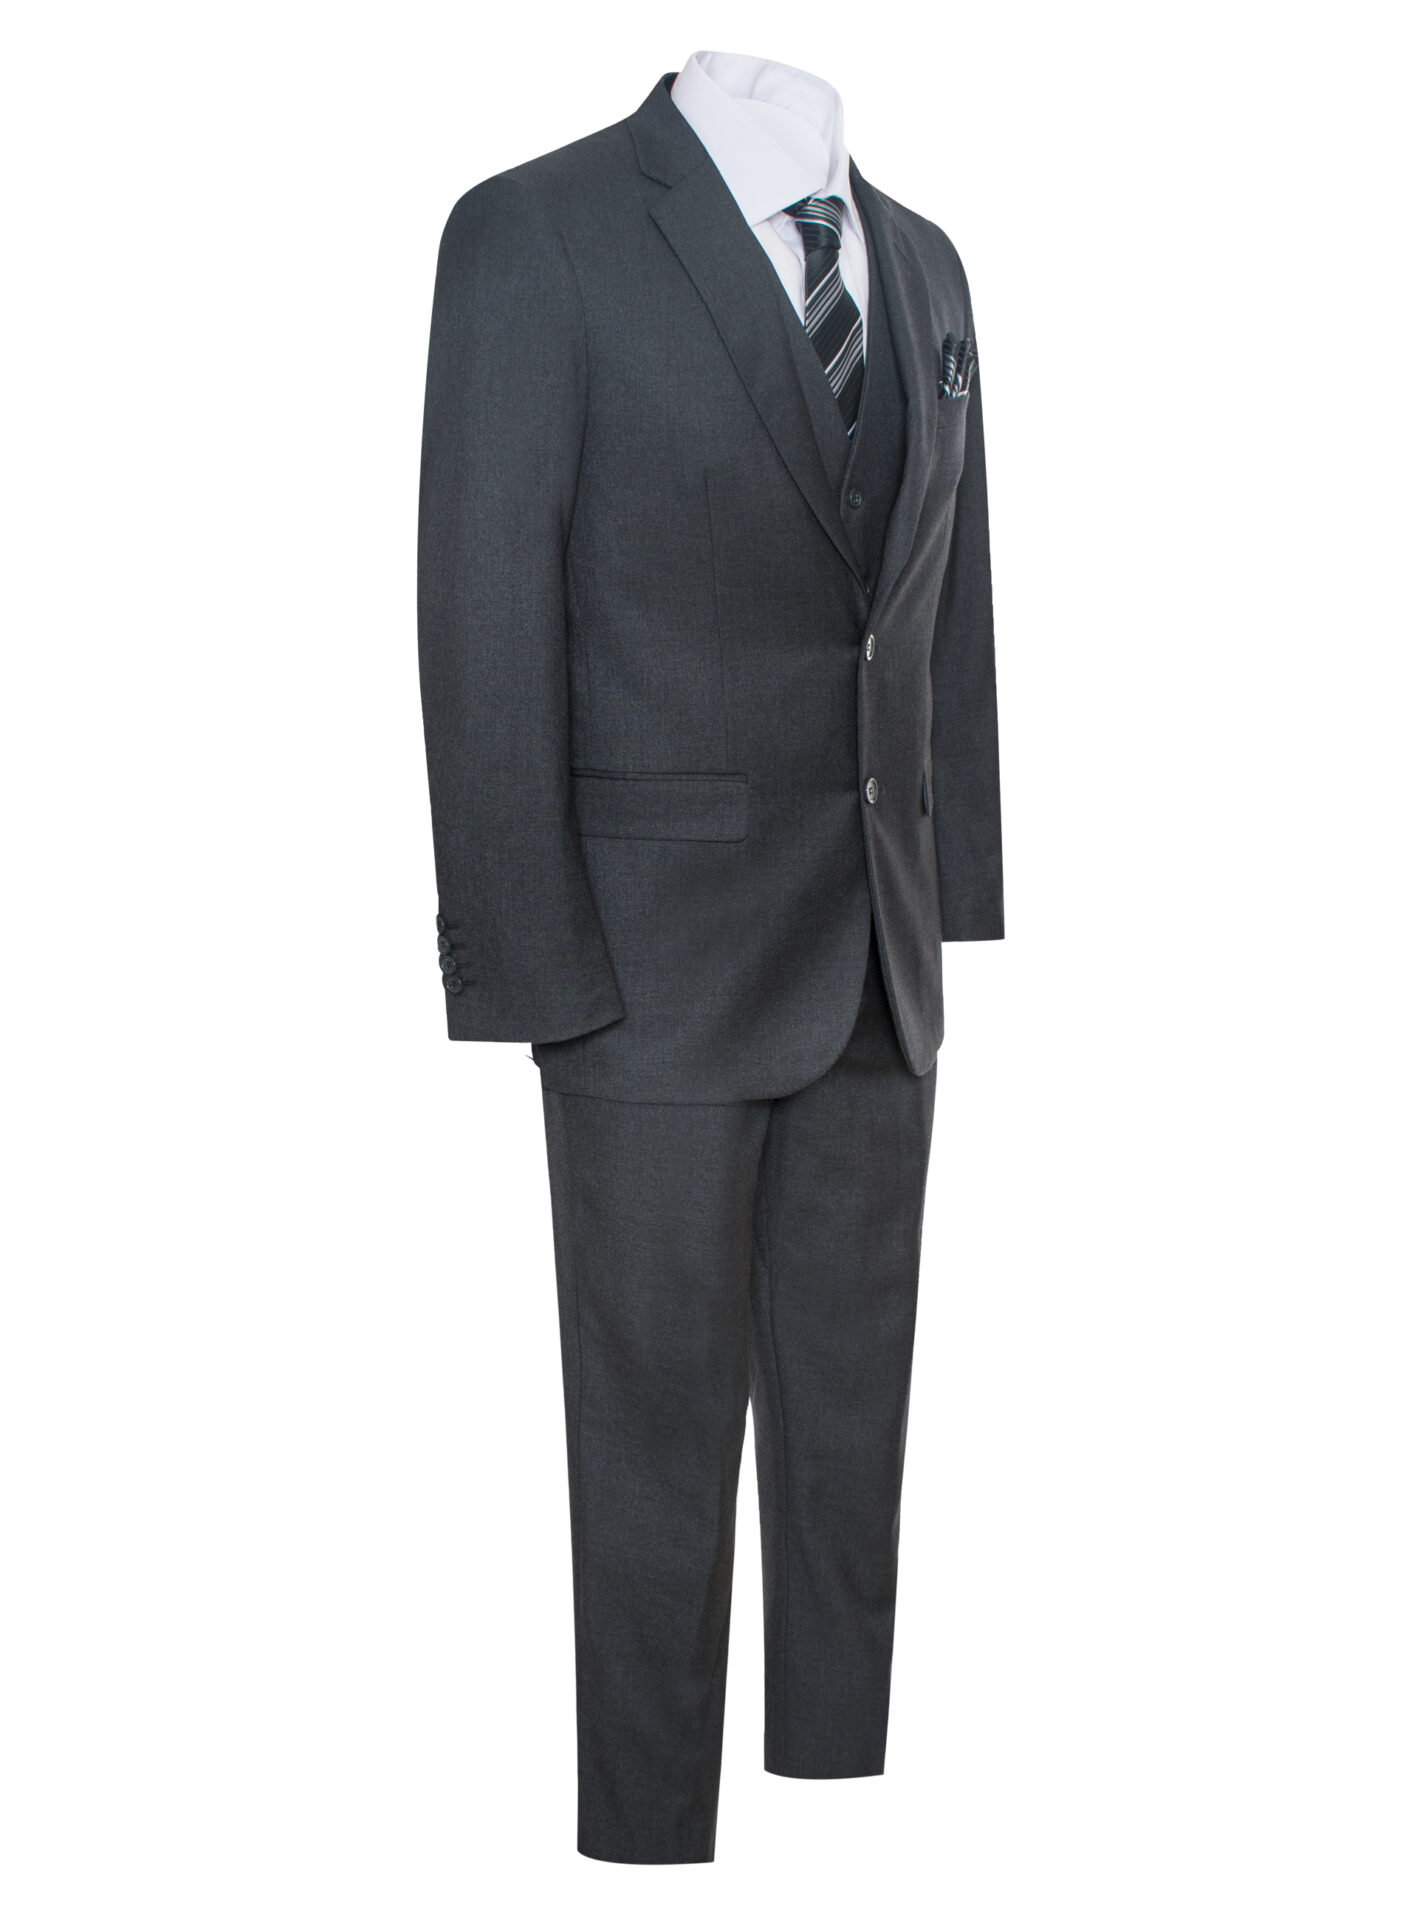 Modern Fit Notch Label Two Button Suit with matching jacket